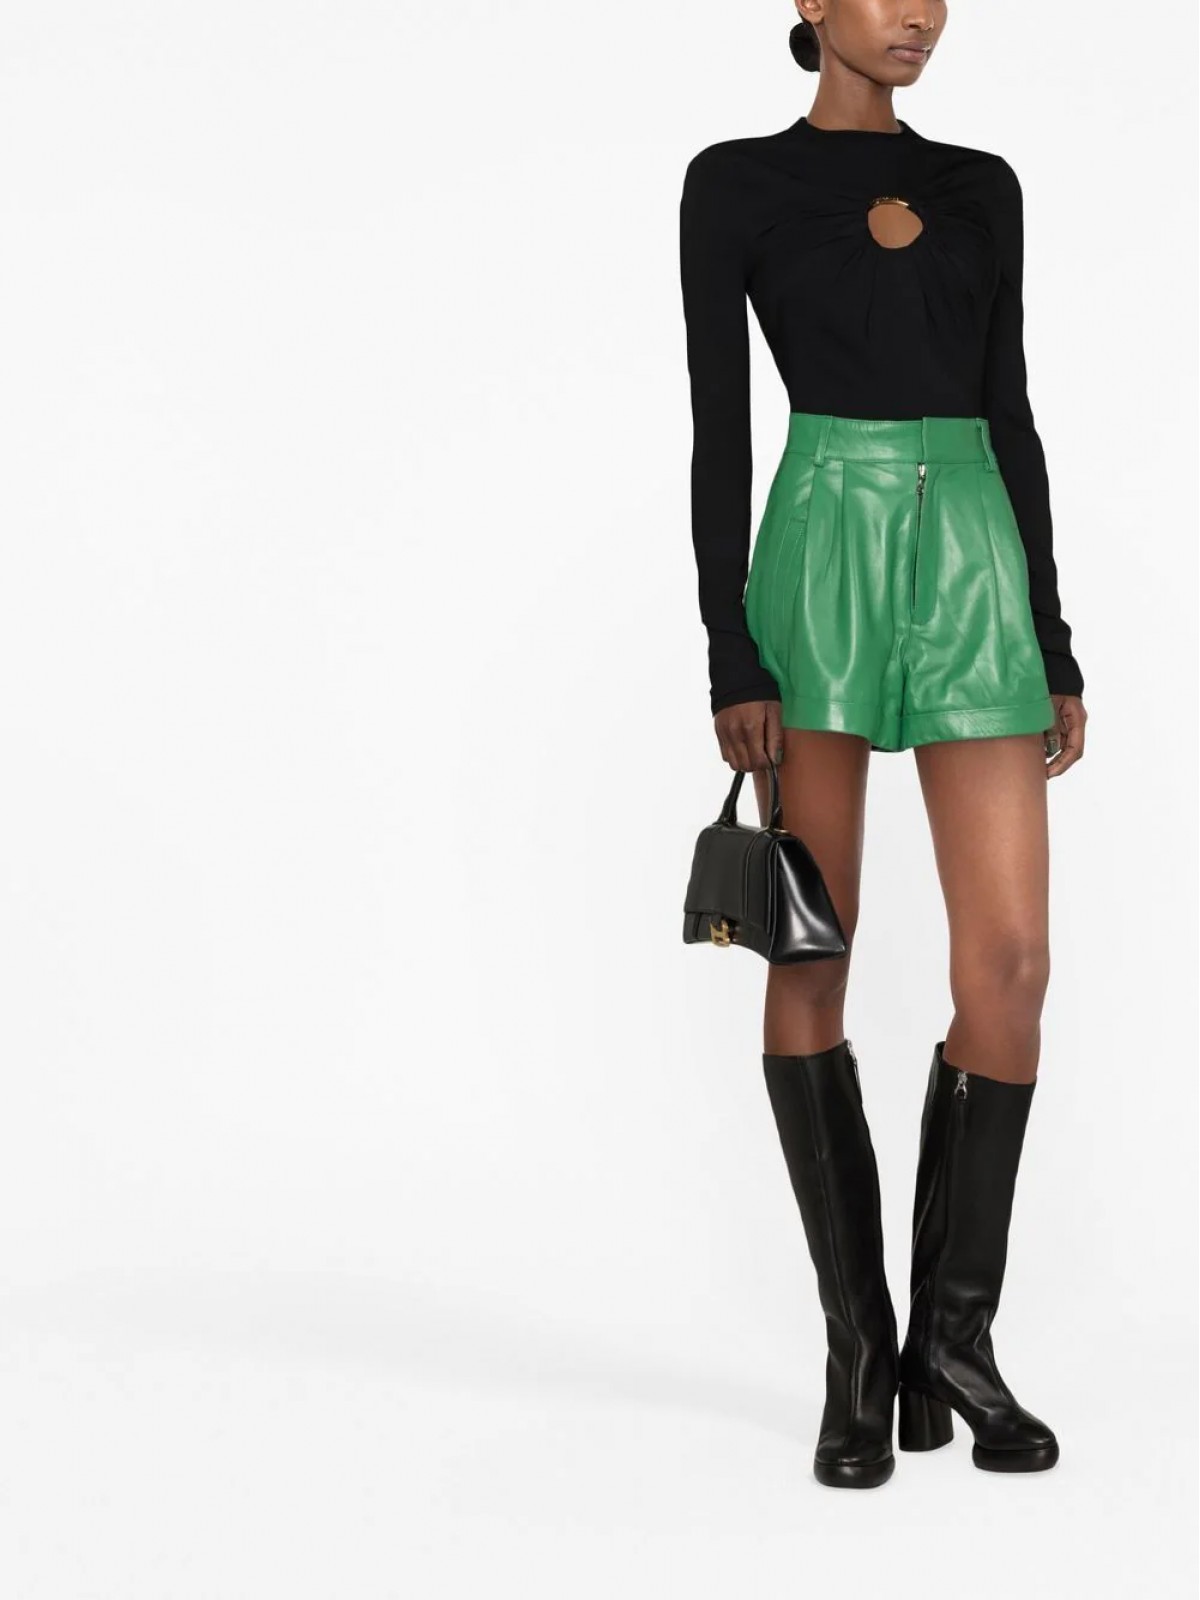 HIGH-WAISTED LEATHER SHORTS